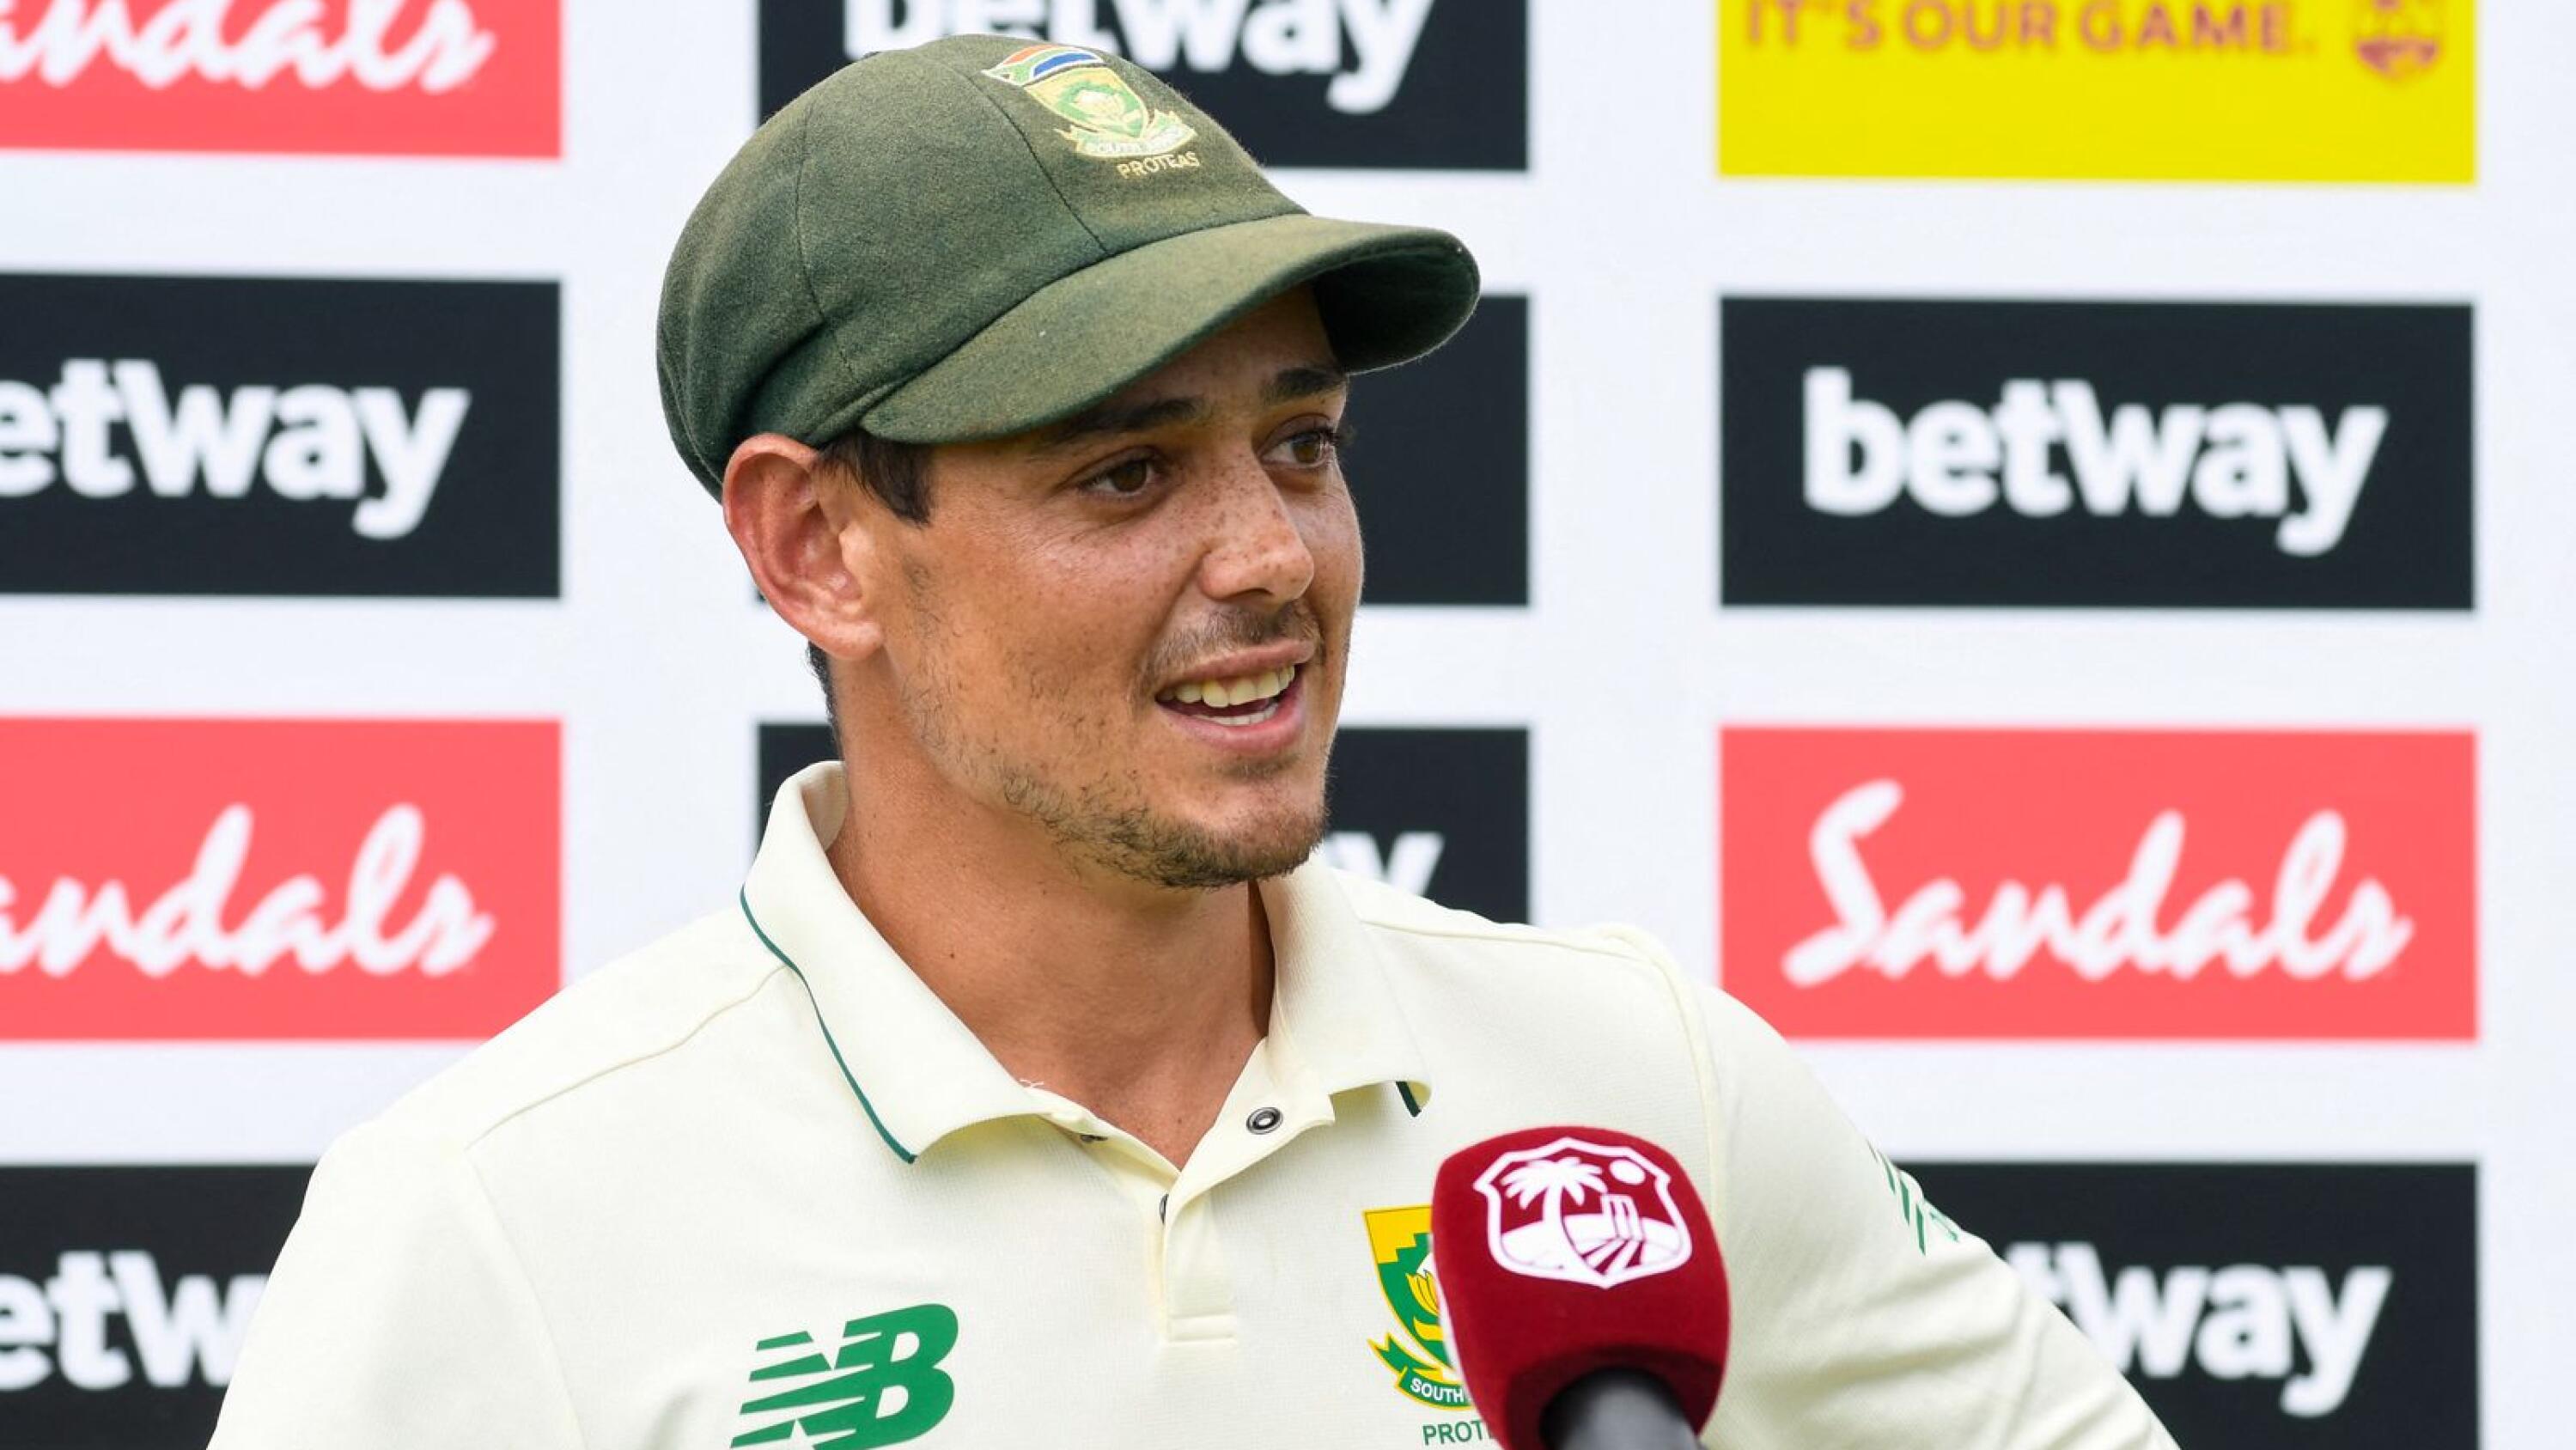 Proteas’ wicketkeeper Quinton de Kock speaks to a reporter after being named man of the series at the end of day four of the second Test against the West Indies at Darren Sammy Cricket Ground on Monday